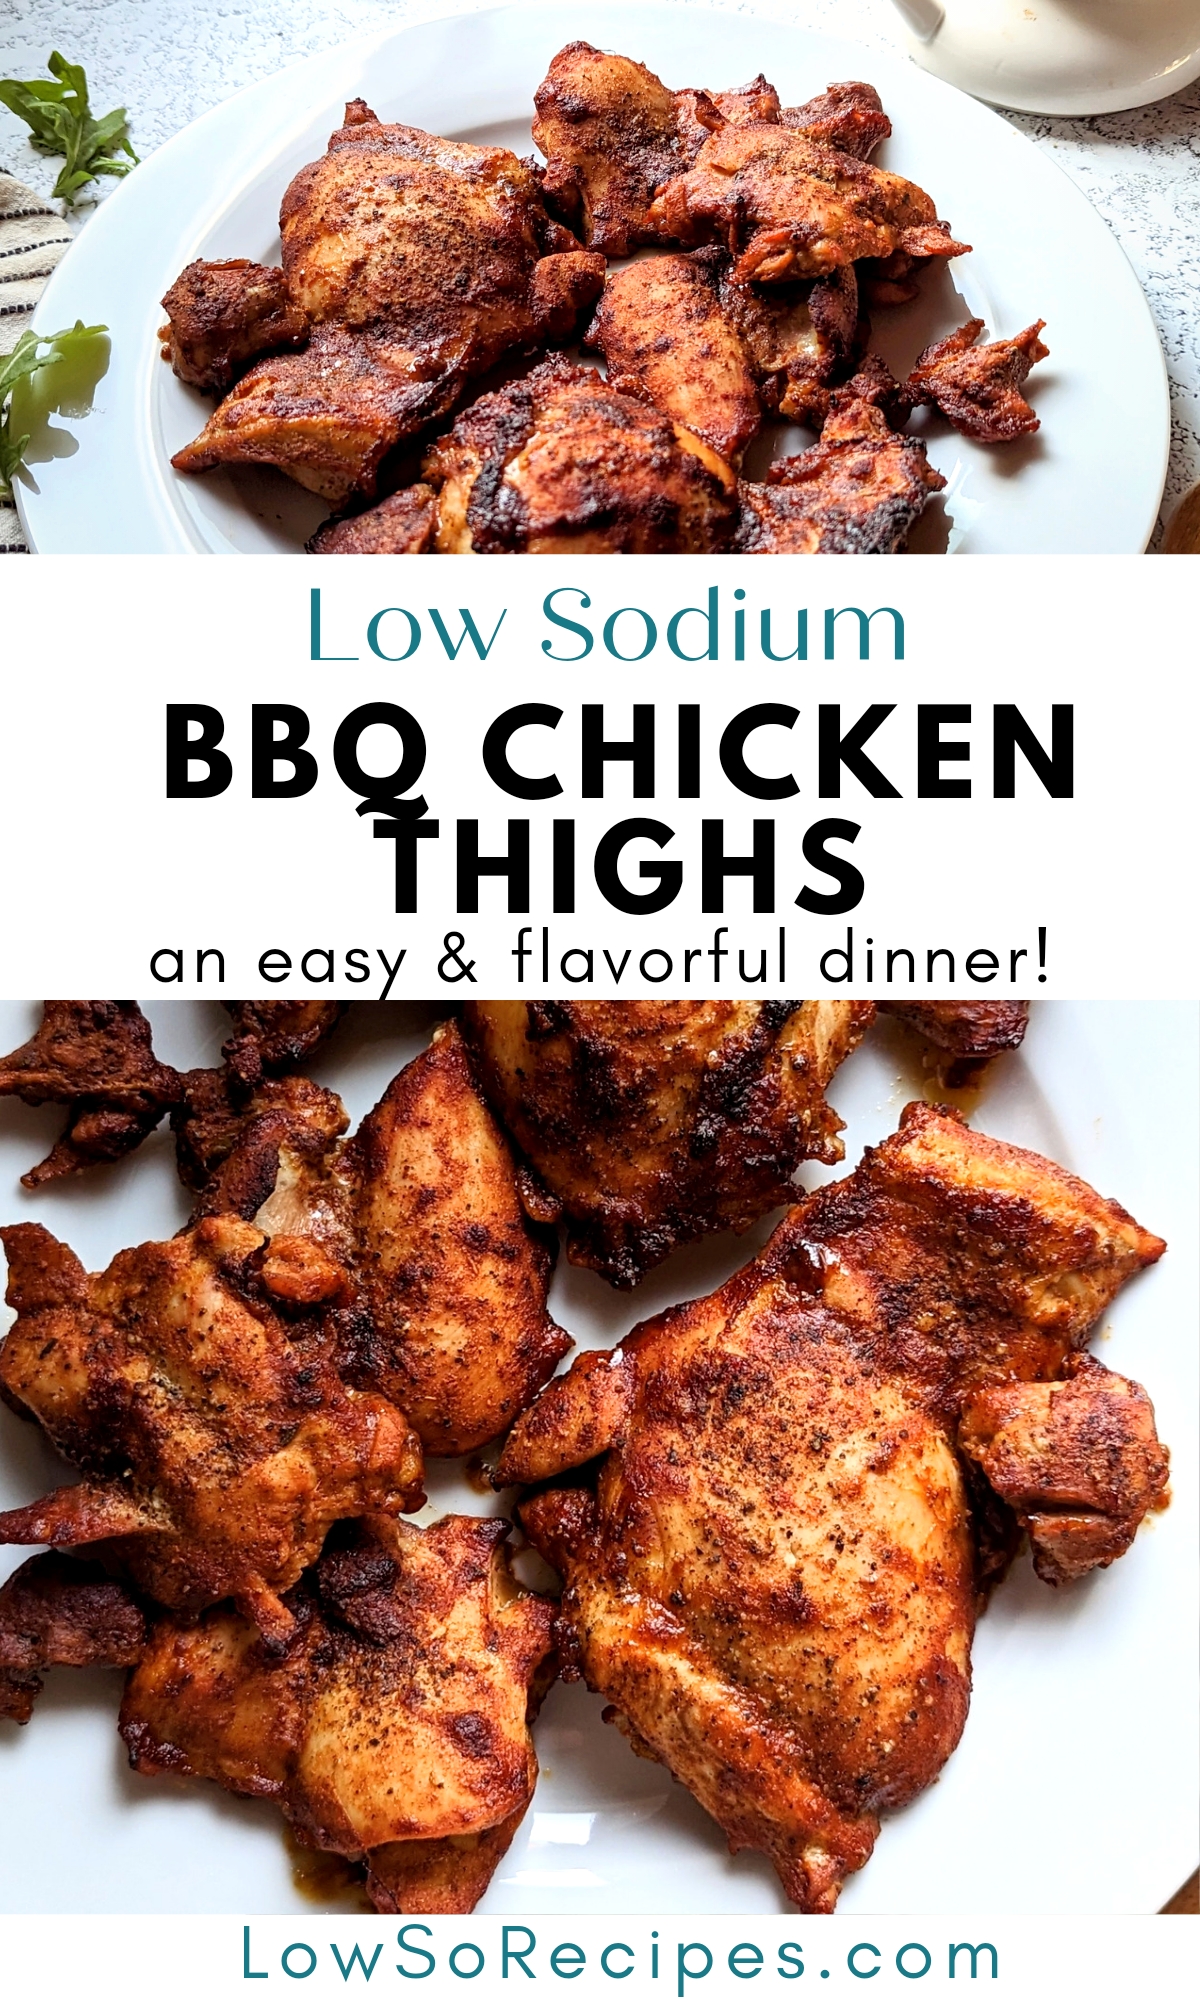 low sodium bbq chicken thighs recipe an easy and flavorful dinner you can grill or bake in the oven